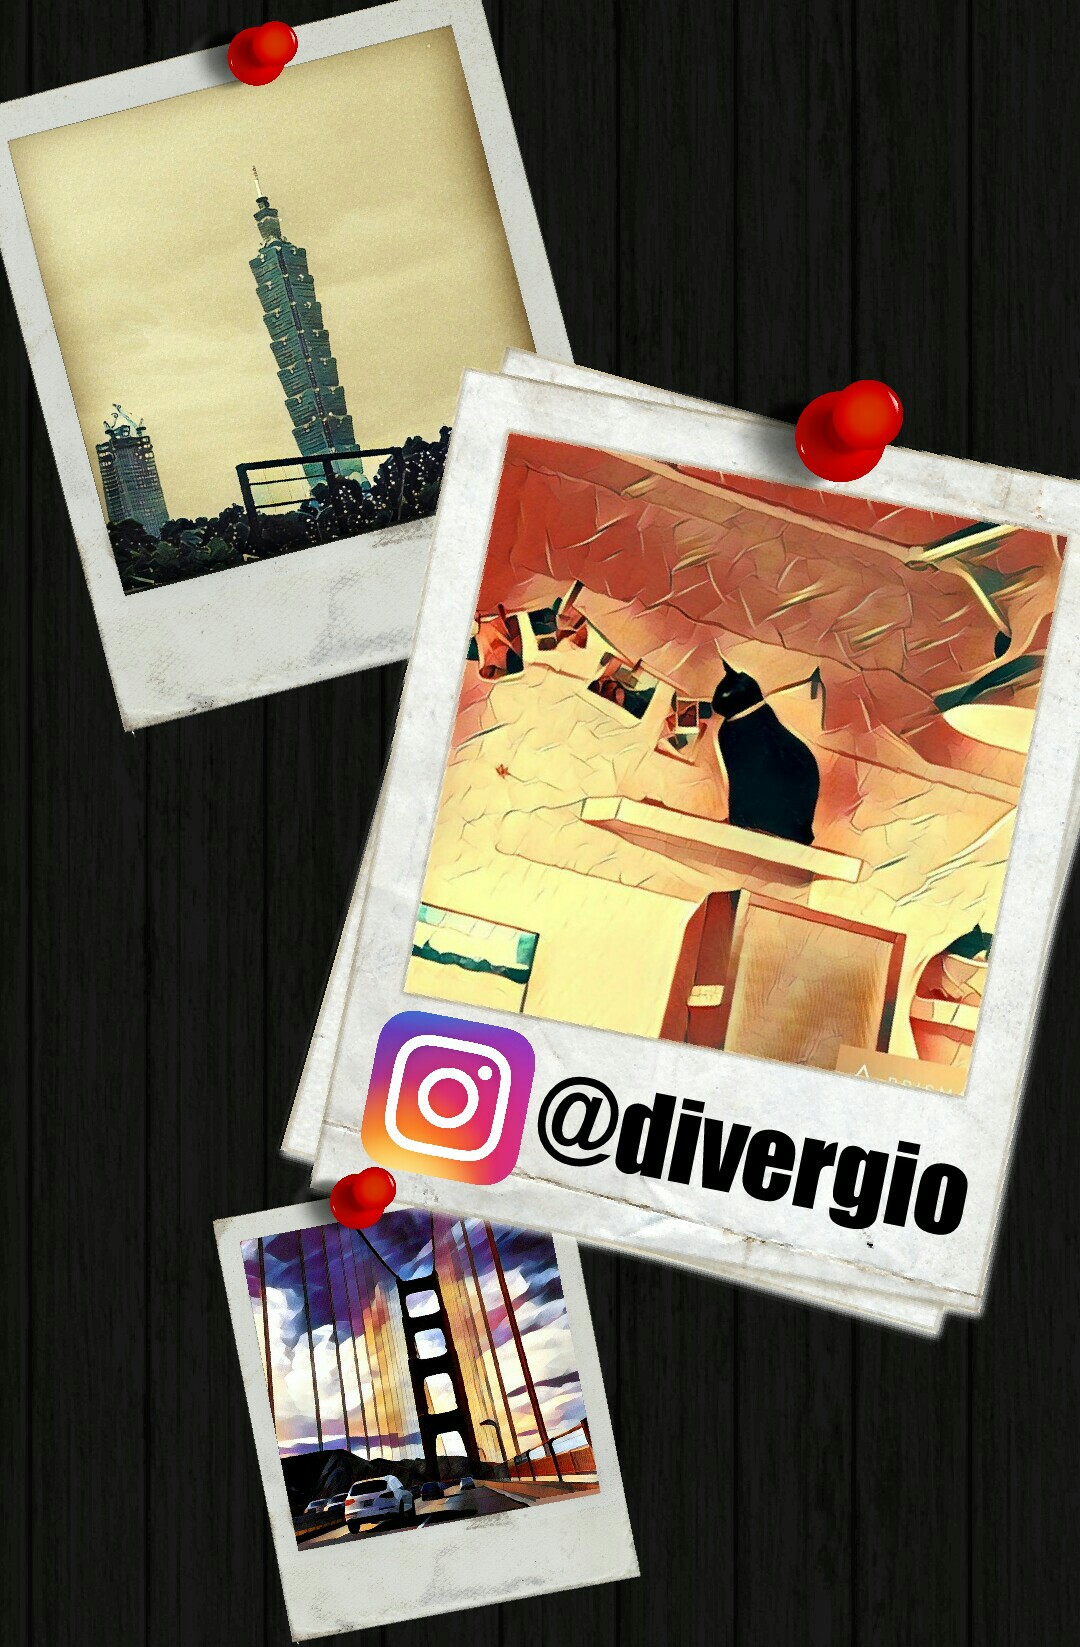 Follow @divergio on Instagram if you like this :)